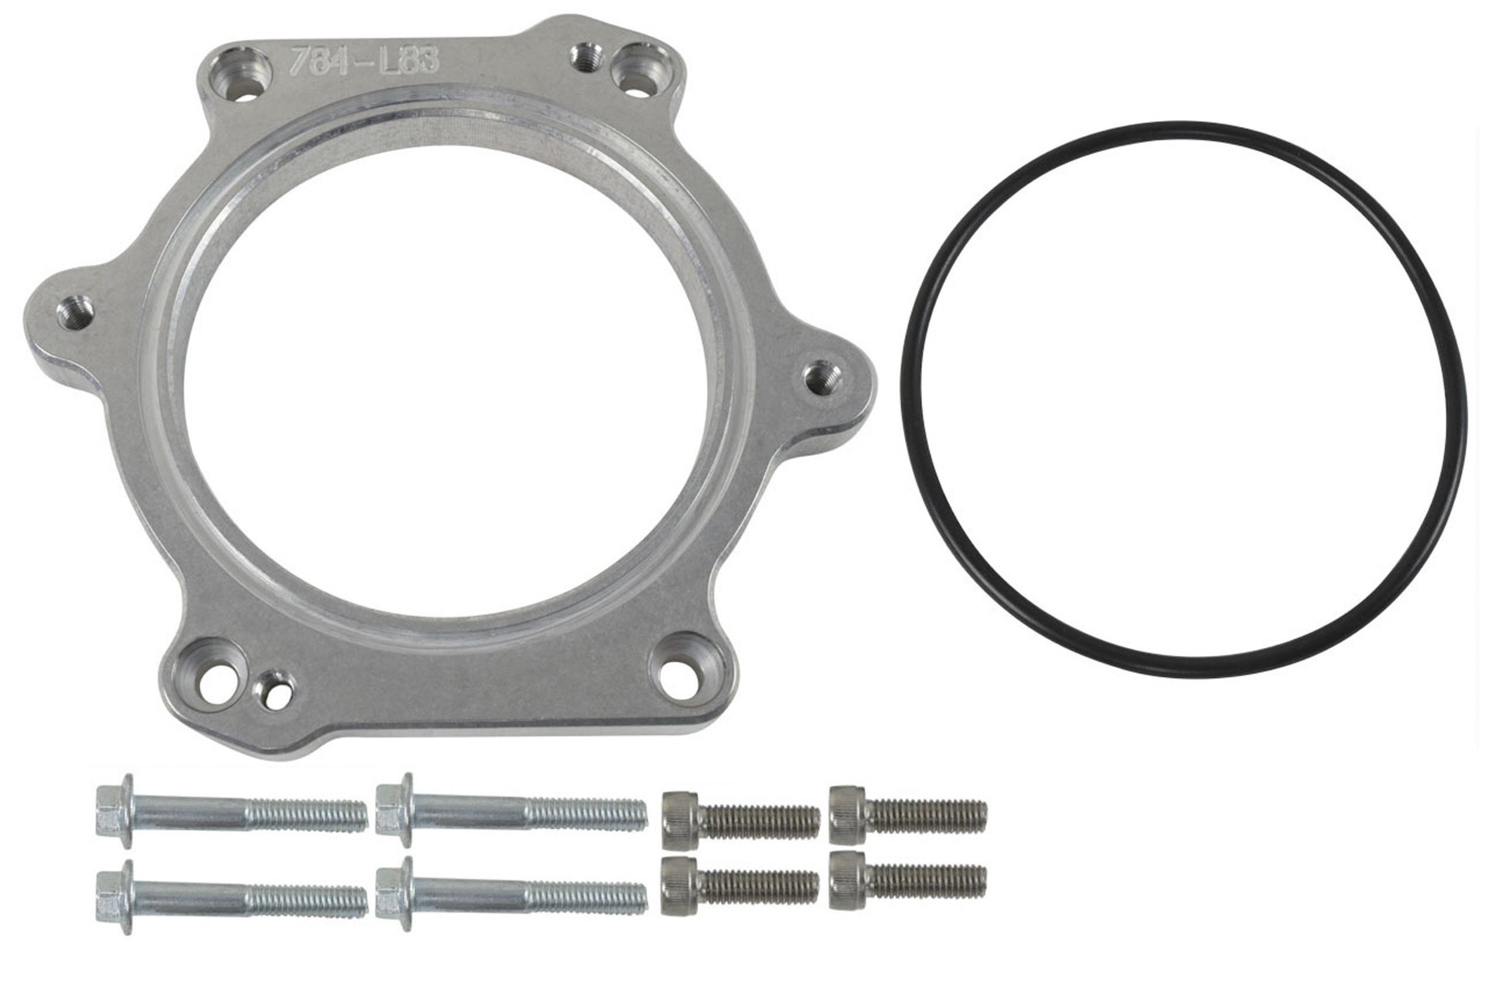 ICT Billet 551784-L83 Throttle Body Adapter, 1/2 in Thick, Gasket / Hardware, Rotation, Aluminum, Natural, GM GenV LT-Series, Each